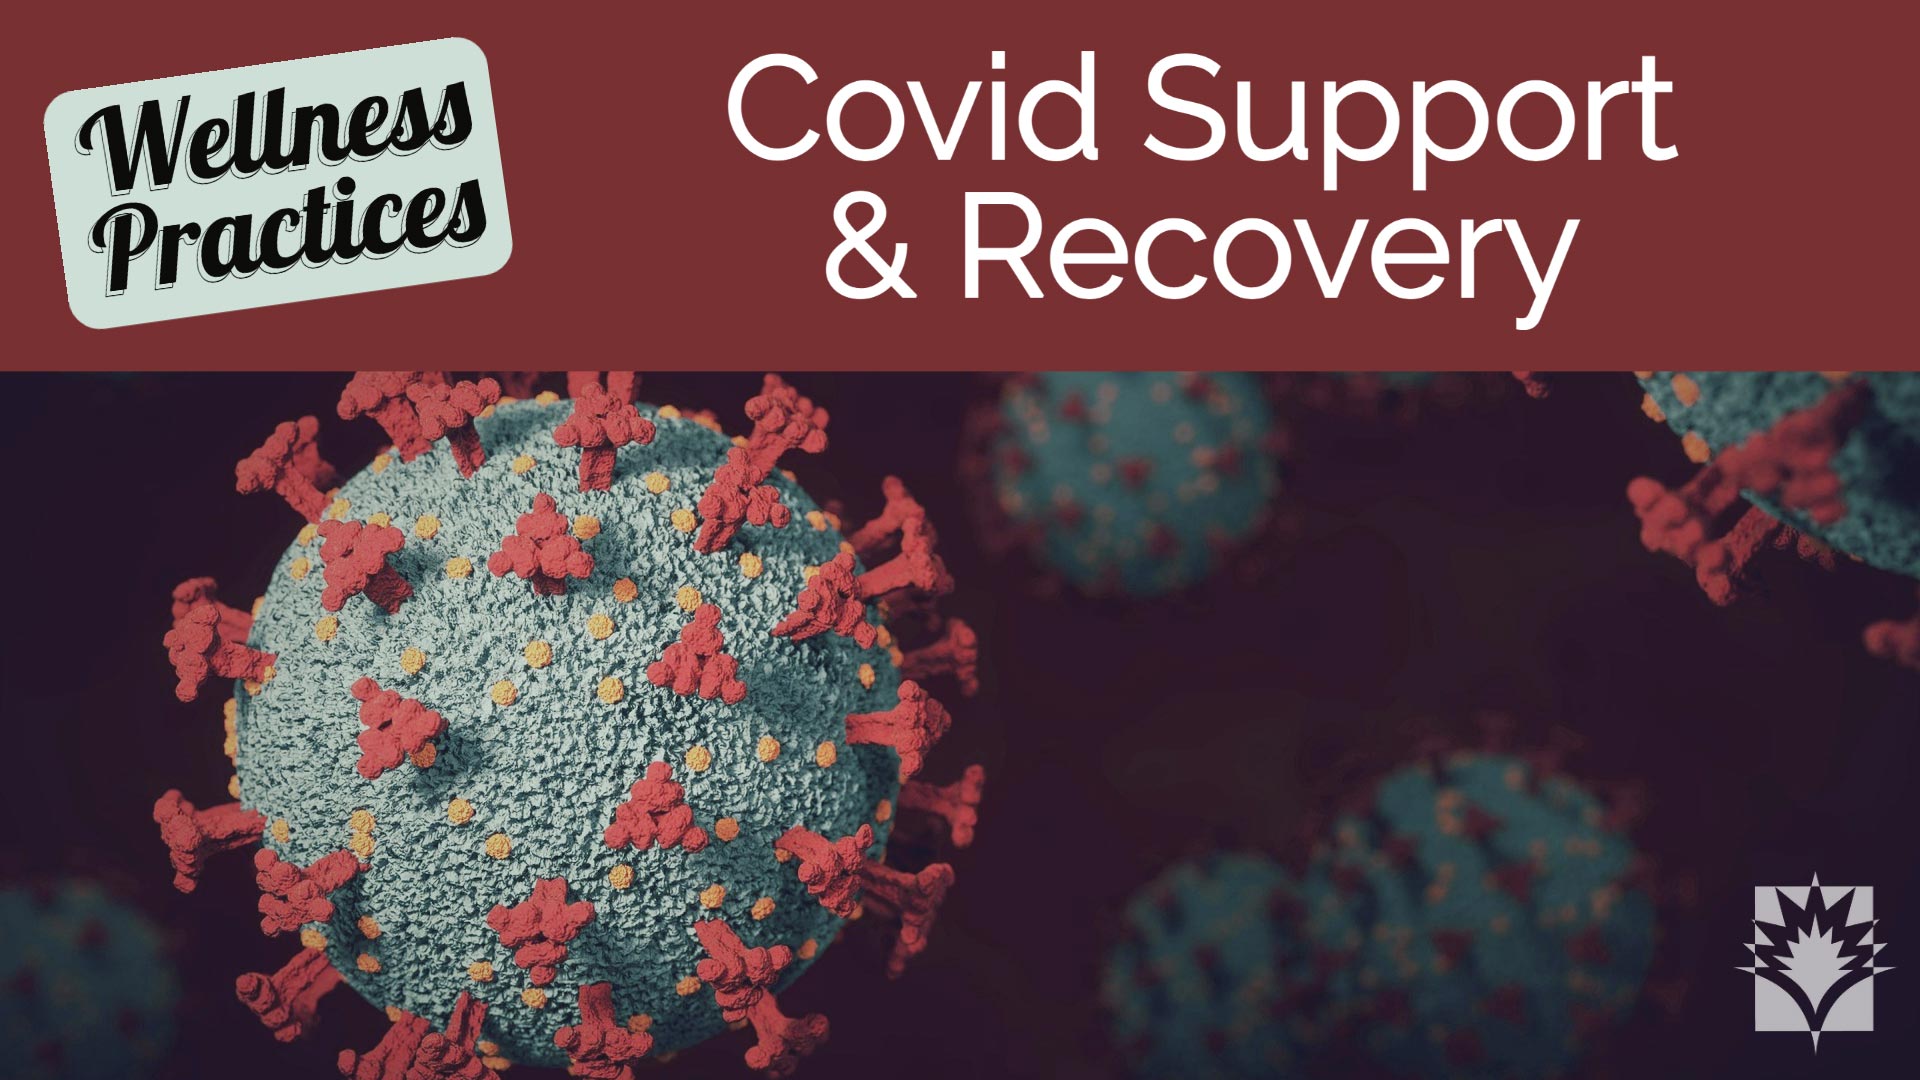 Covid Support & Recovery